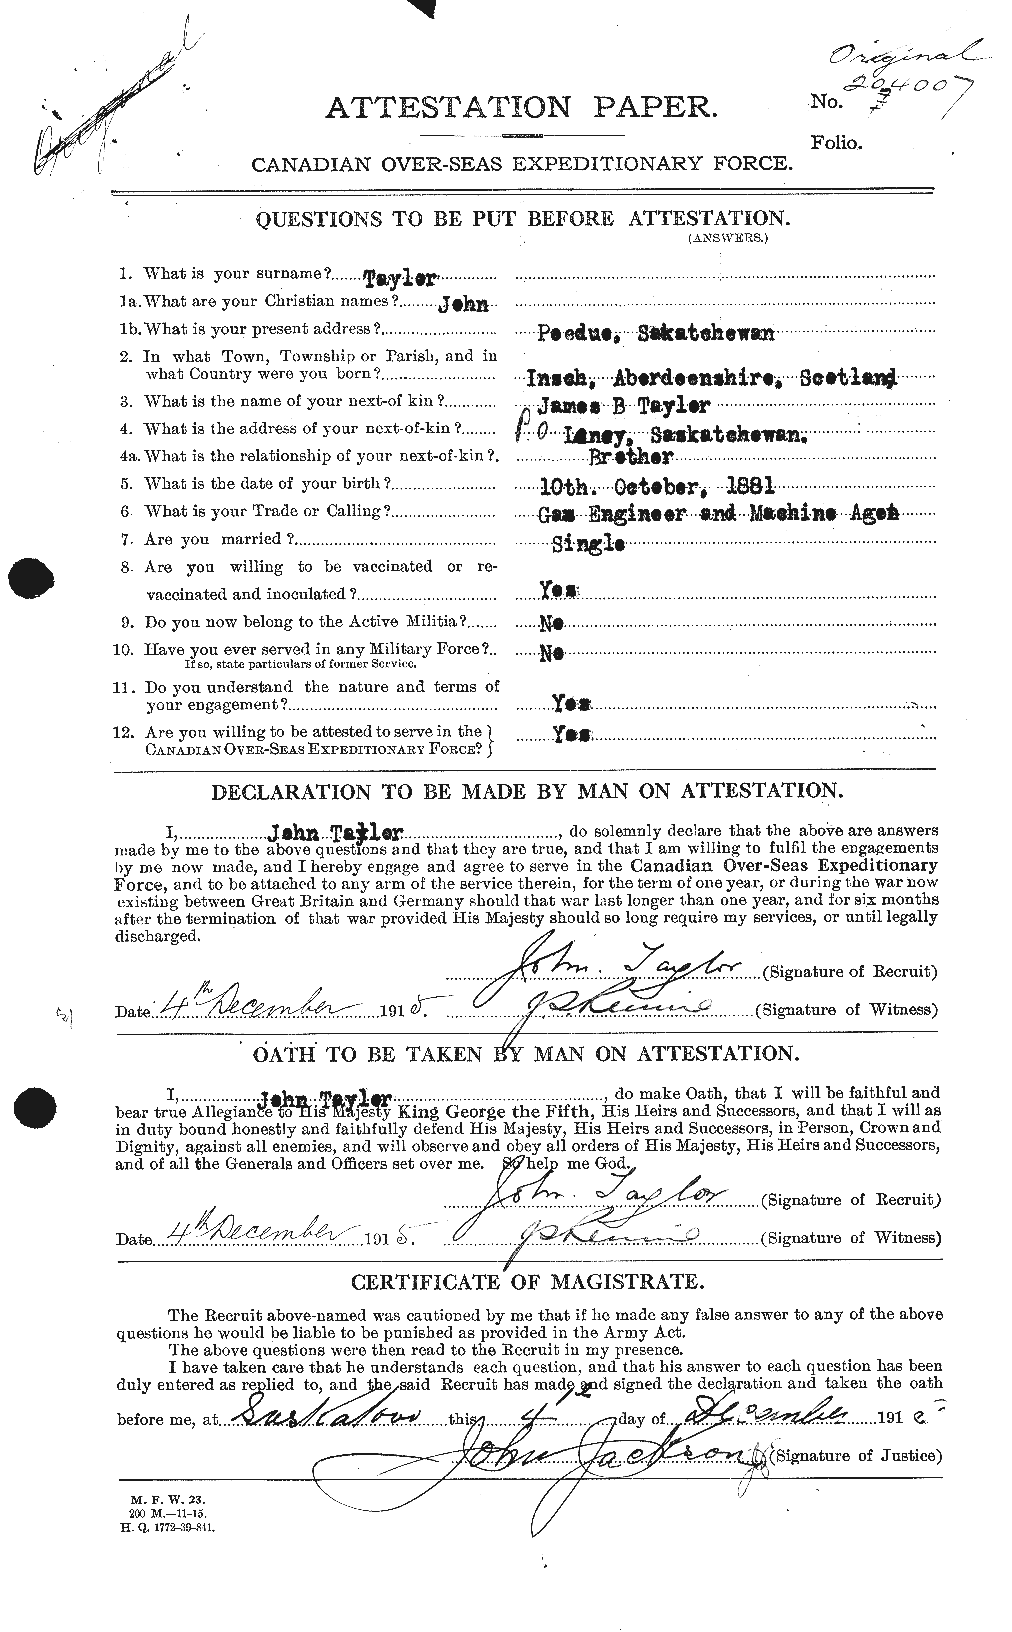 Personnel Records of the First World War - CEF 626992a